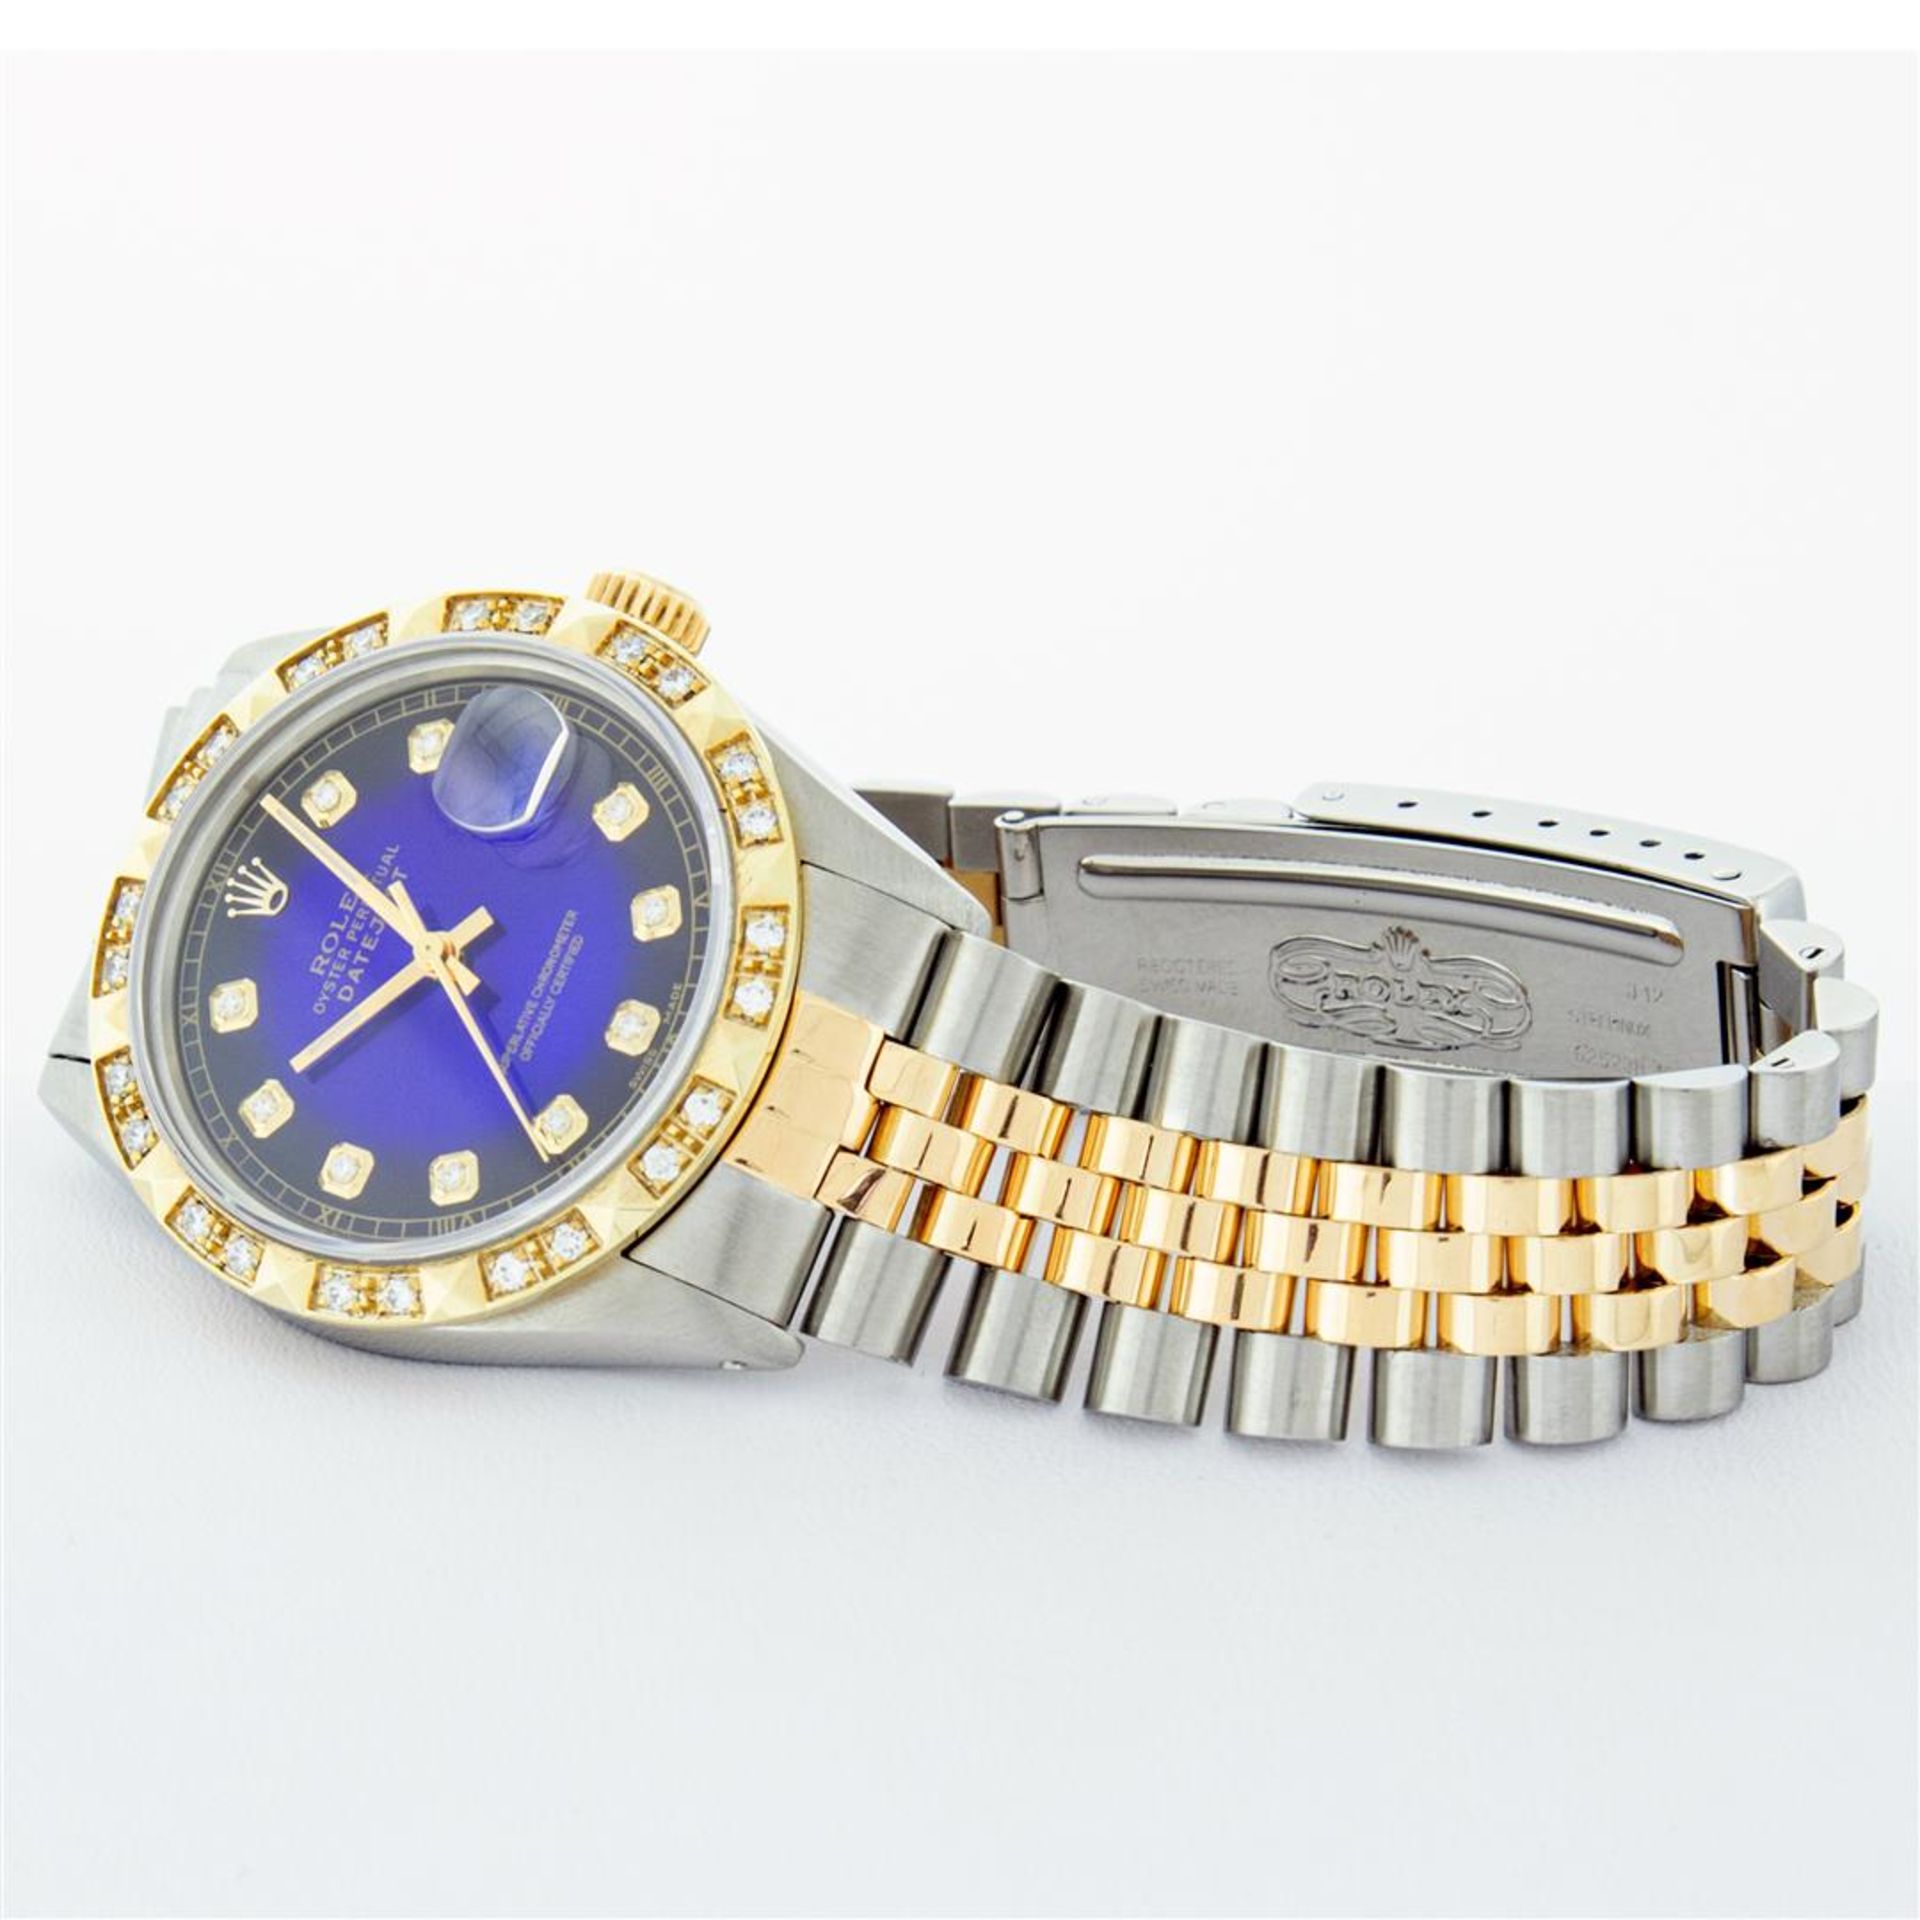 Rolex 2T Blue Vignette Pyramid Diamond Oyster Perpetual Datejust 36MM - Image 5 of 9